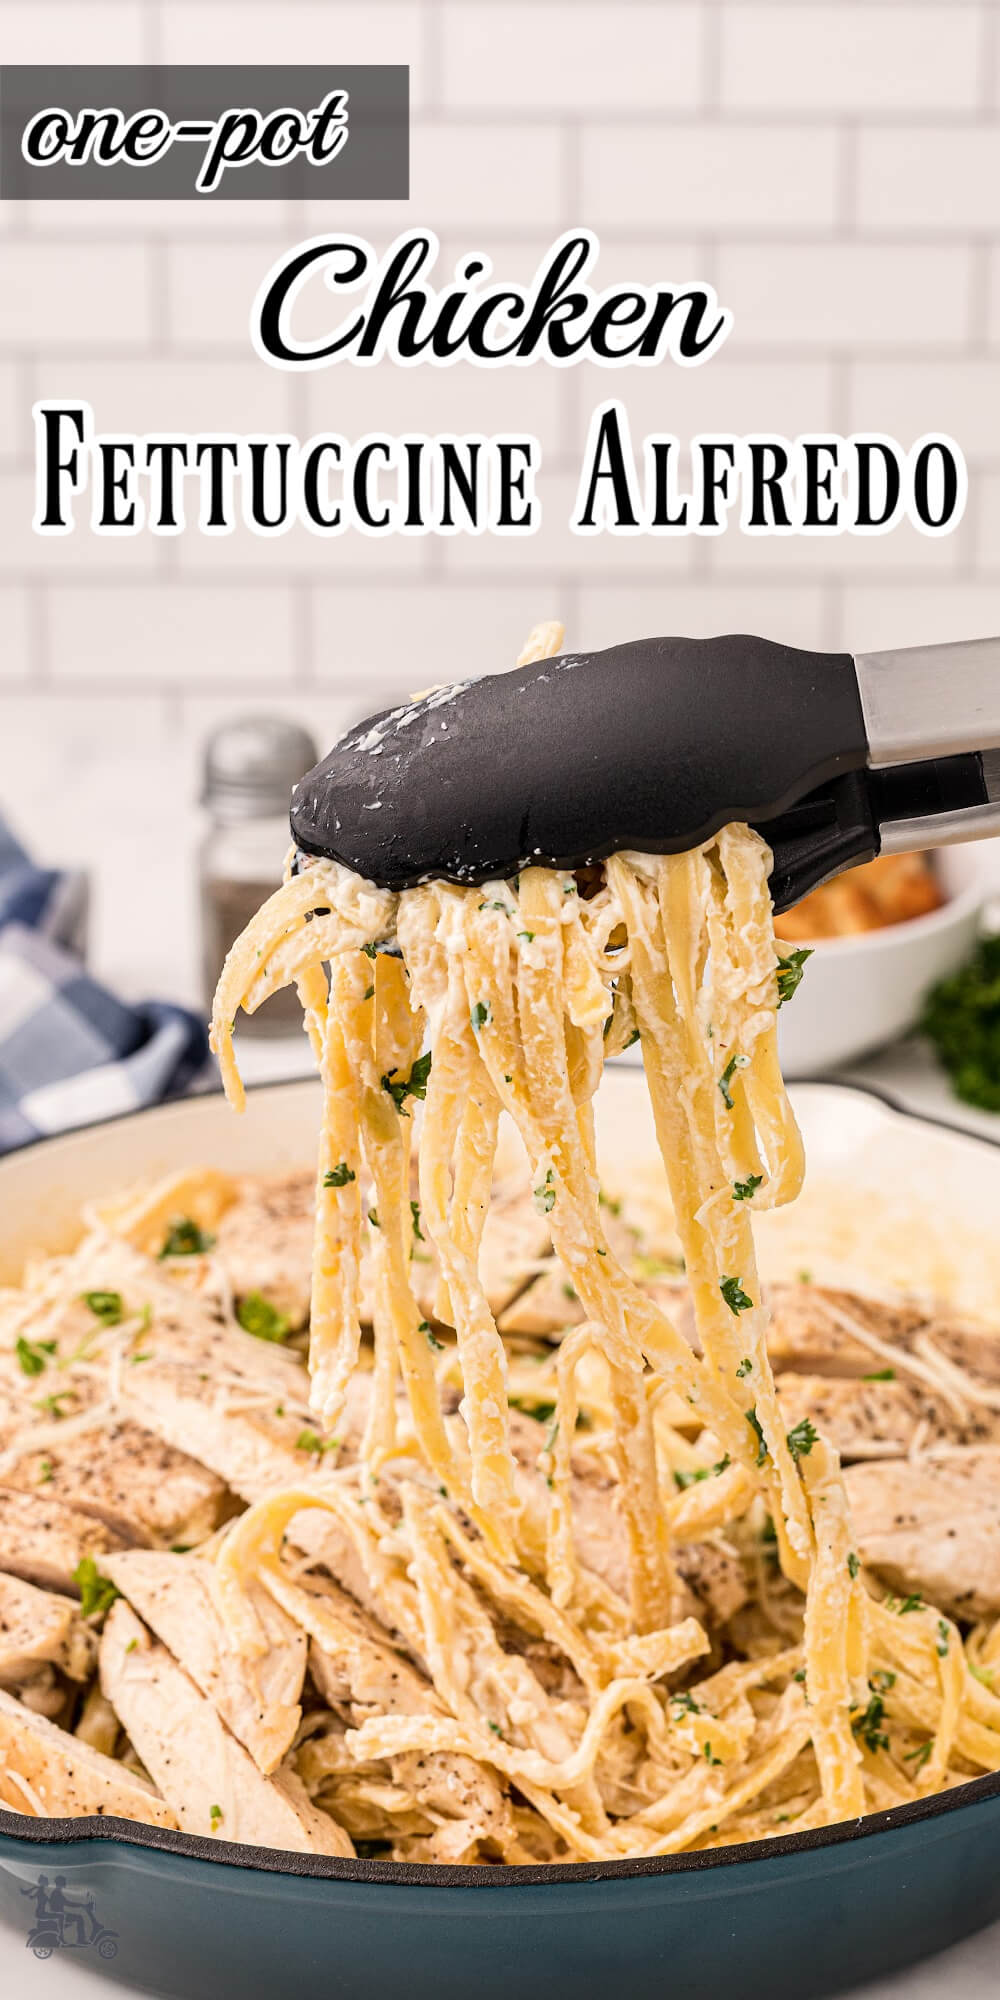 Pinterest image of Chicken Fettuccine Alfredo with tongs holding up pasta strands.